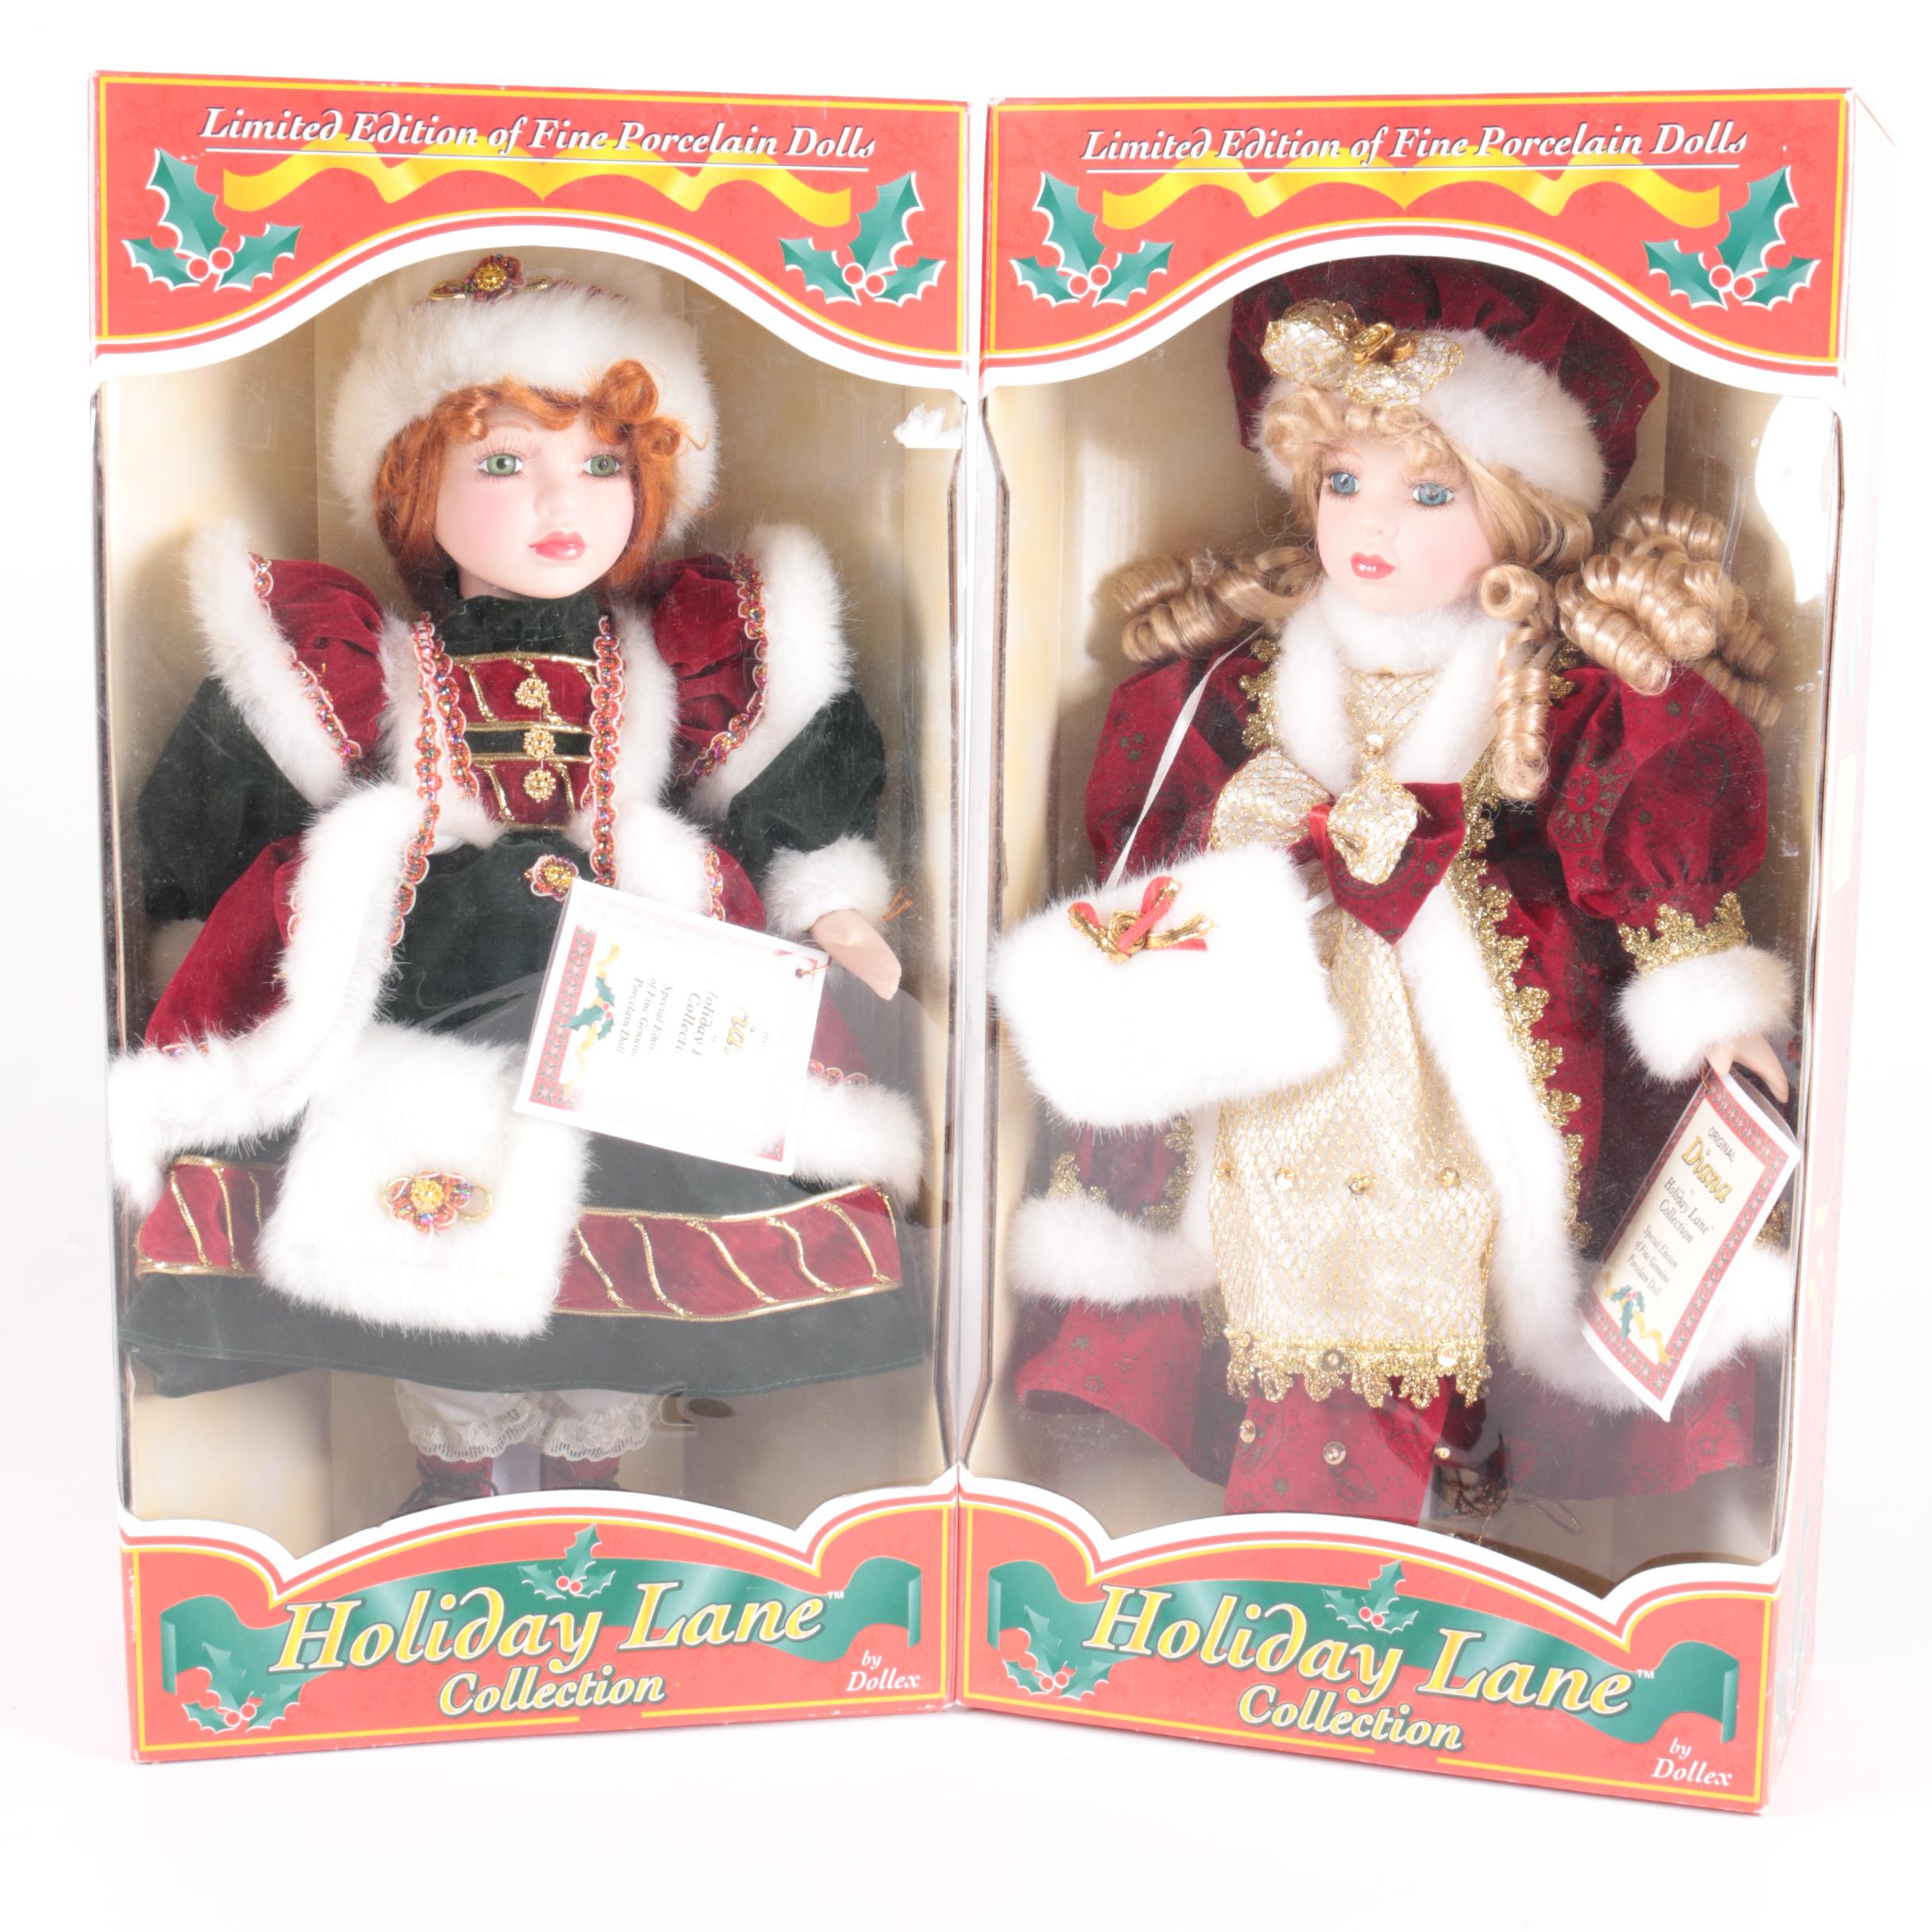 holiday lane collection porcelain dolls